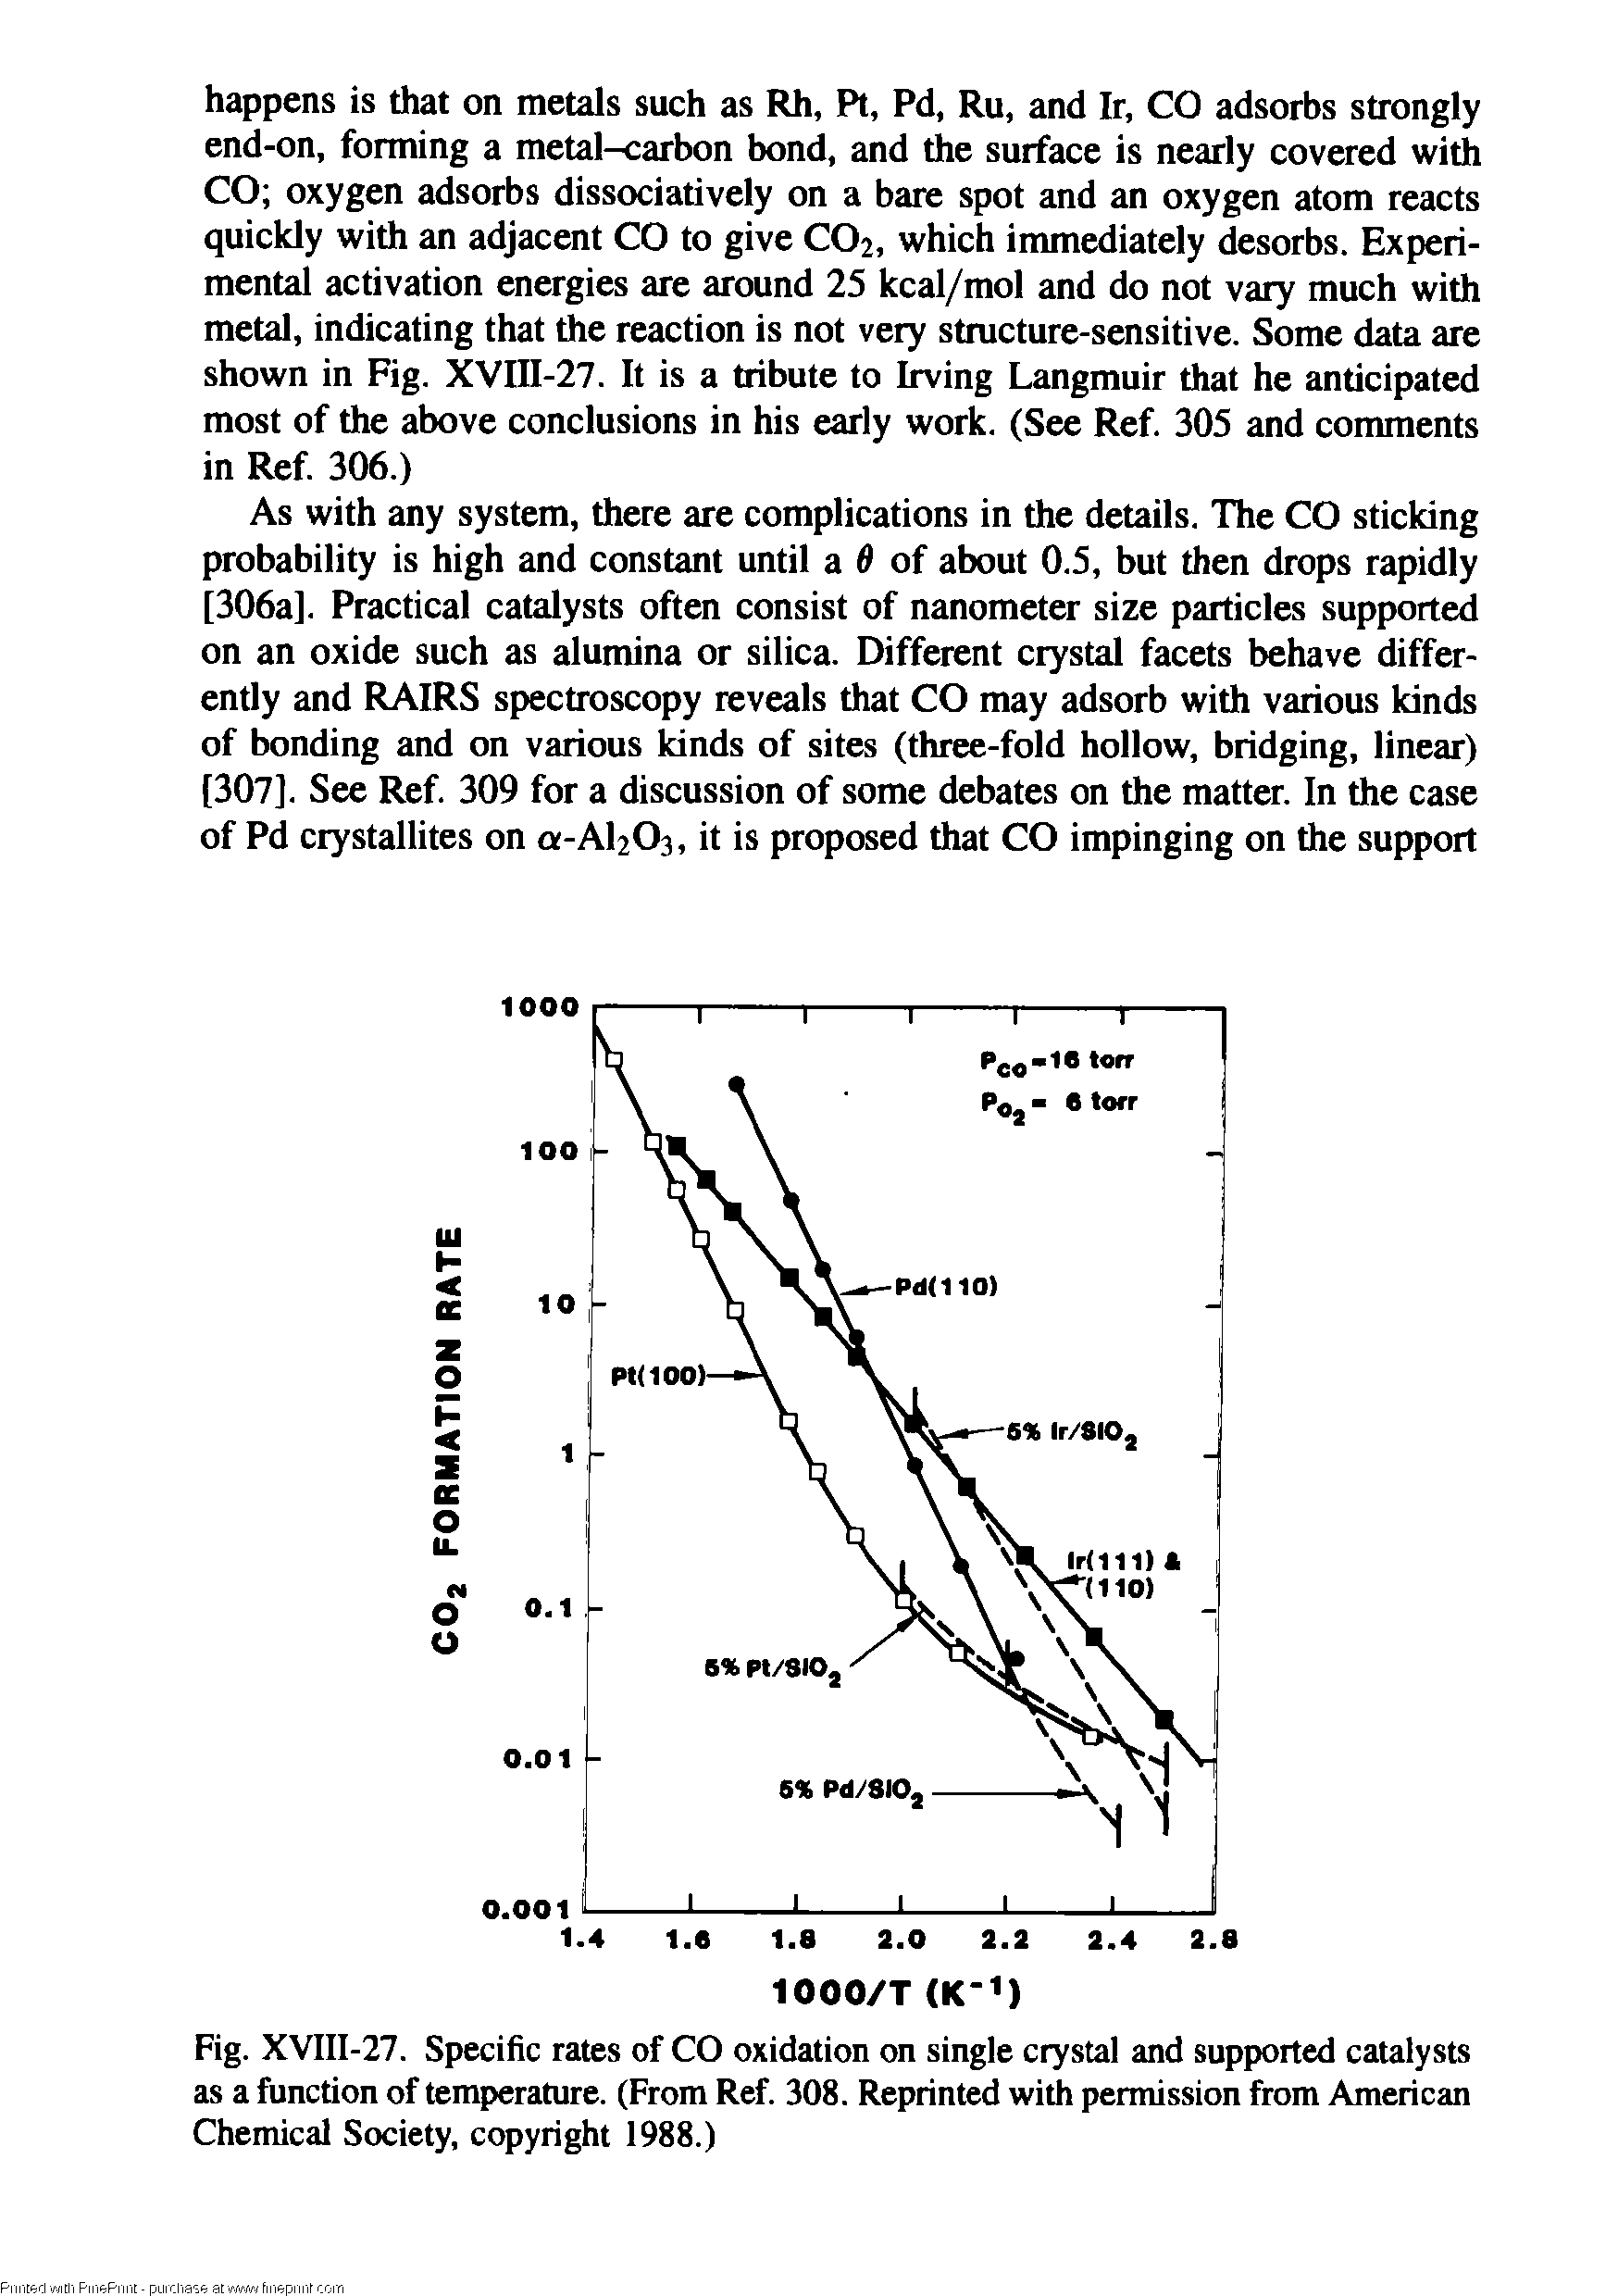 Fig. XVIII-27. Specific rates of CO oxidation on single crystal and supported catalysts as a function of temperature. (From Ref 308. Reprinted with permission from American Chemical Society, copyright 1988.)...